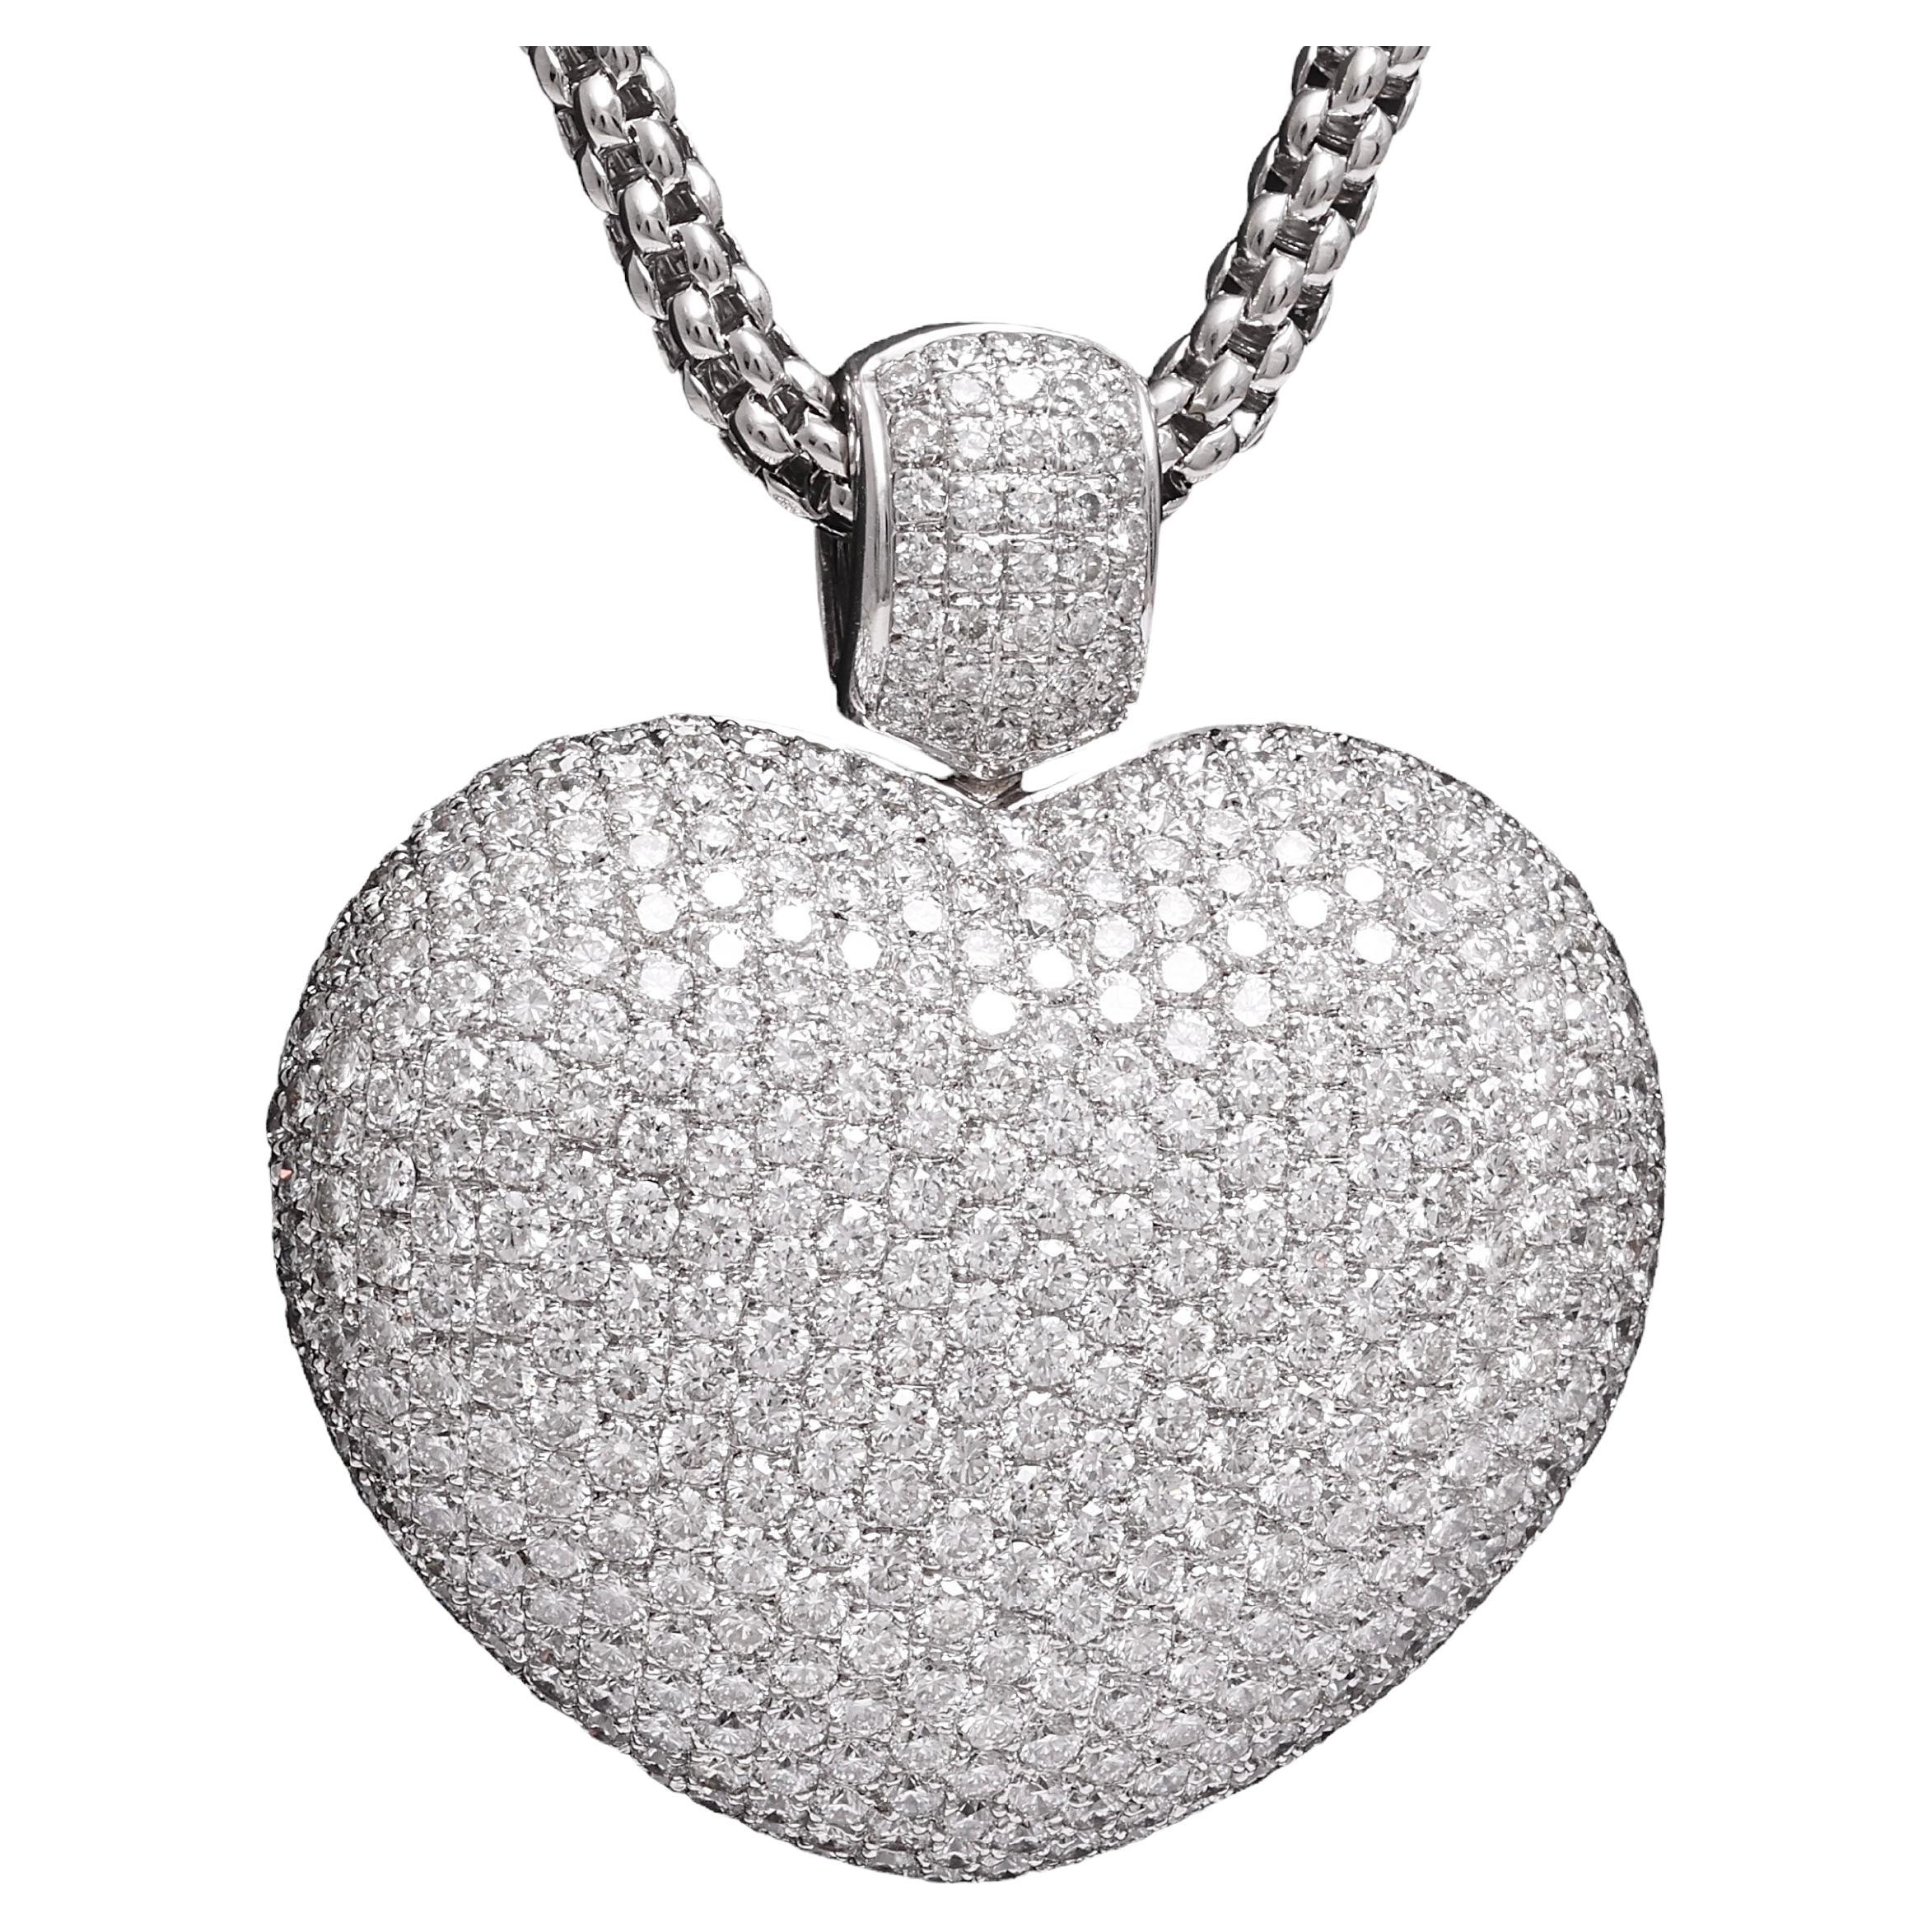 Gorgeous 18kt White Gold Heart Pendant With 17 ct. Top Quality Diamonds With 18kt White Gold Necklace

Diamonds: Brilliant cut diamonds, together 17 ct.

Material: 18 kt. White gold

Measurements: Necklace: length 42 cm long
Pendant: 46.5 mm x 51 mm